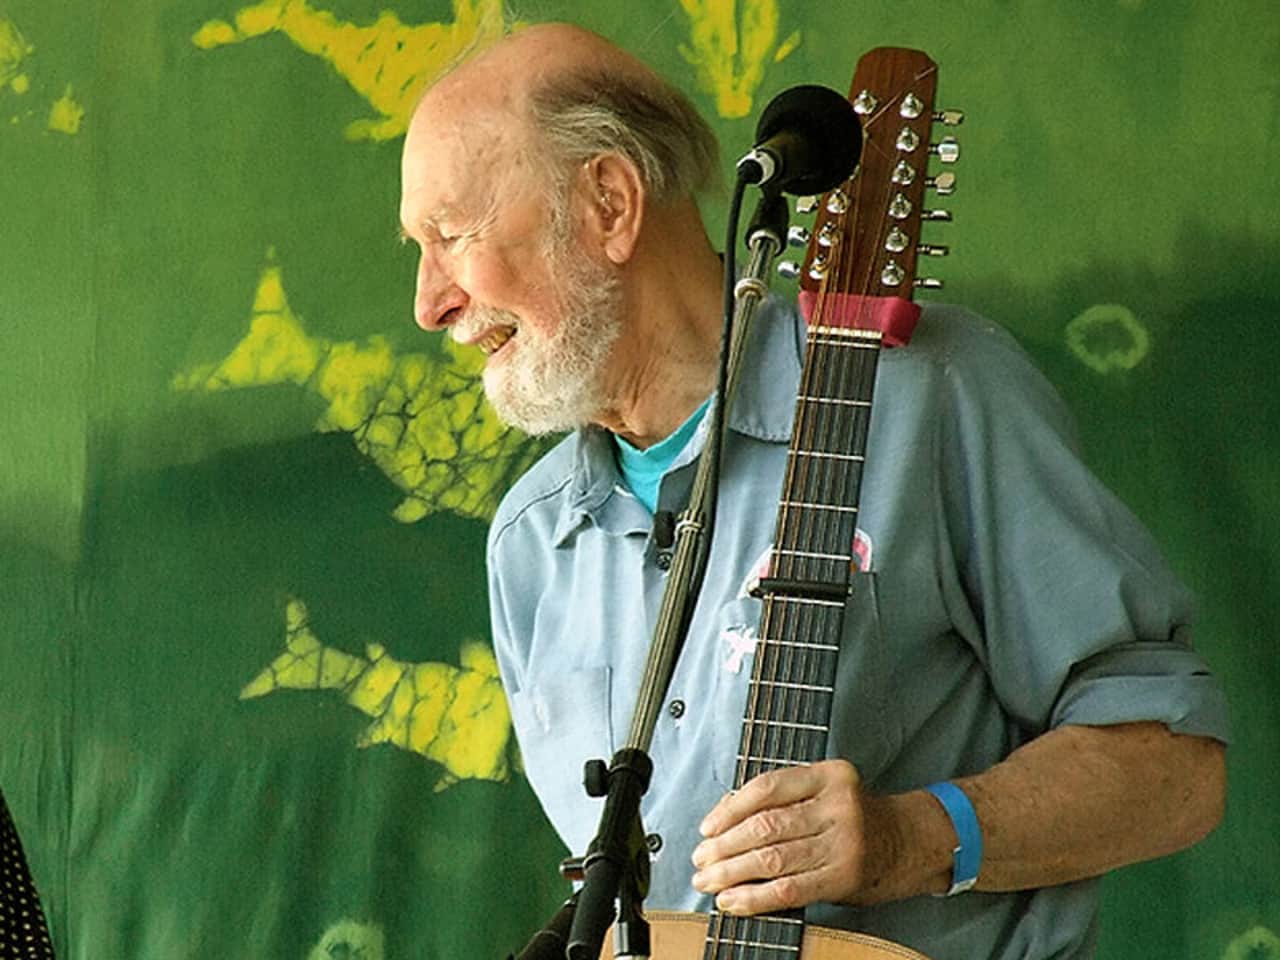 Pete Seeger's Walkabout Clearwater Coffeehouse in White Plains is looking to draw younger people into its fold to keep the message alive.